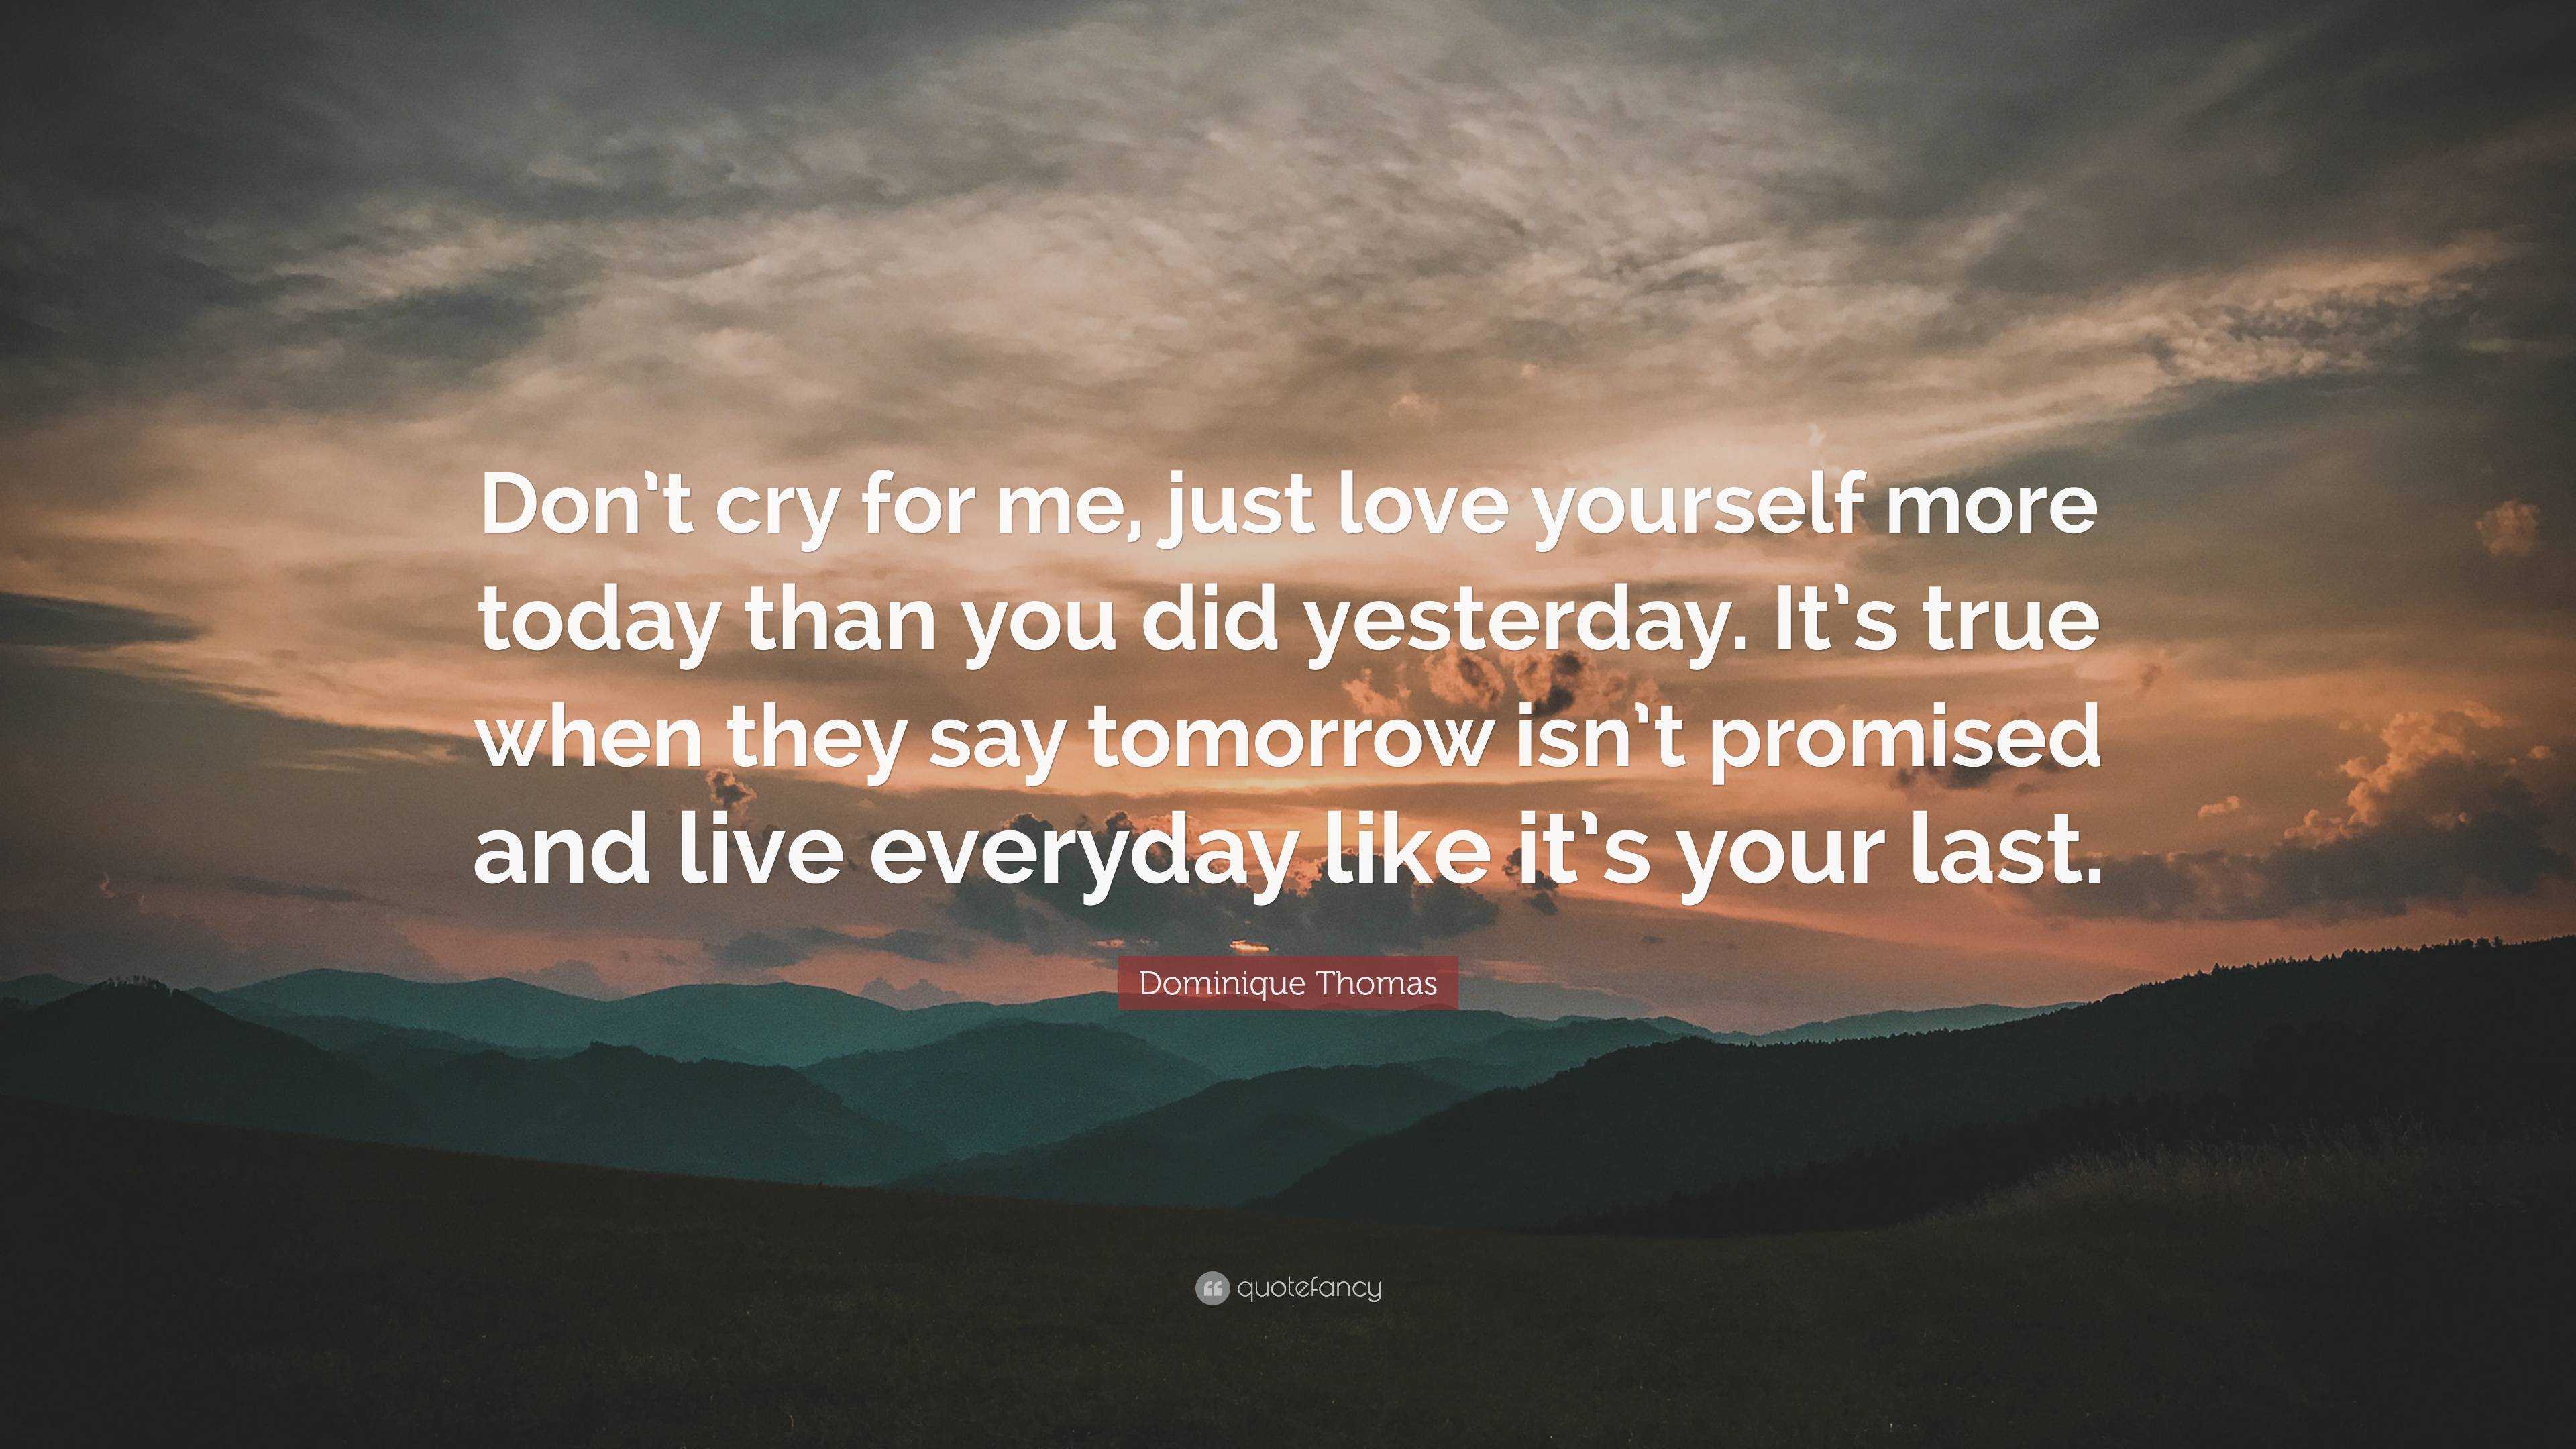 Dominique Thomas Quote Don T Cry For Me Just Love Yourself More Today Than You Did Yesterday It S True When They Say Tomorrow Isn T Promised